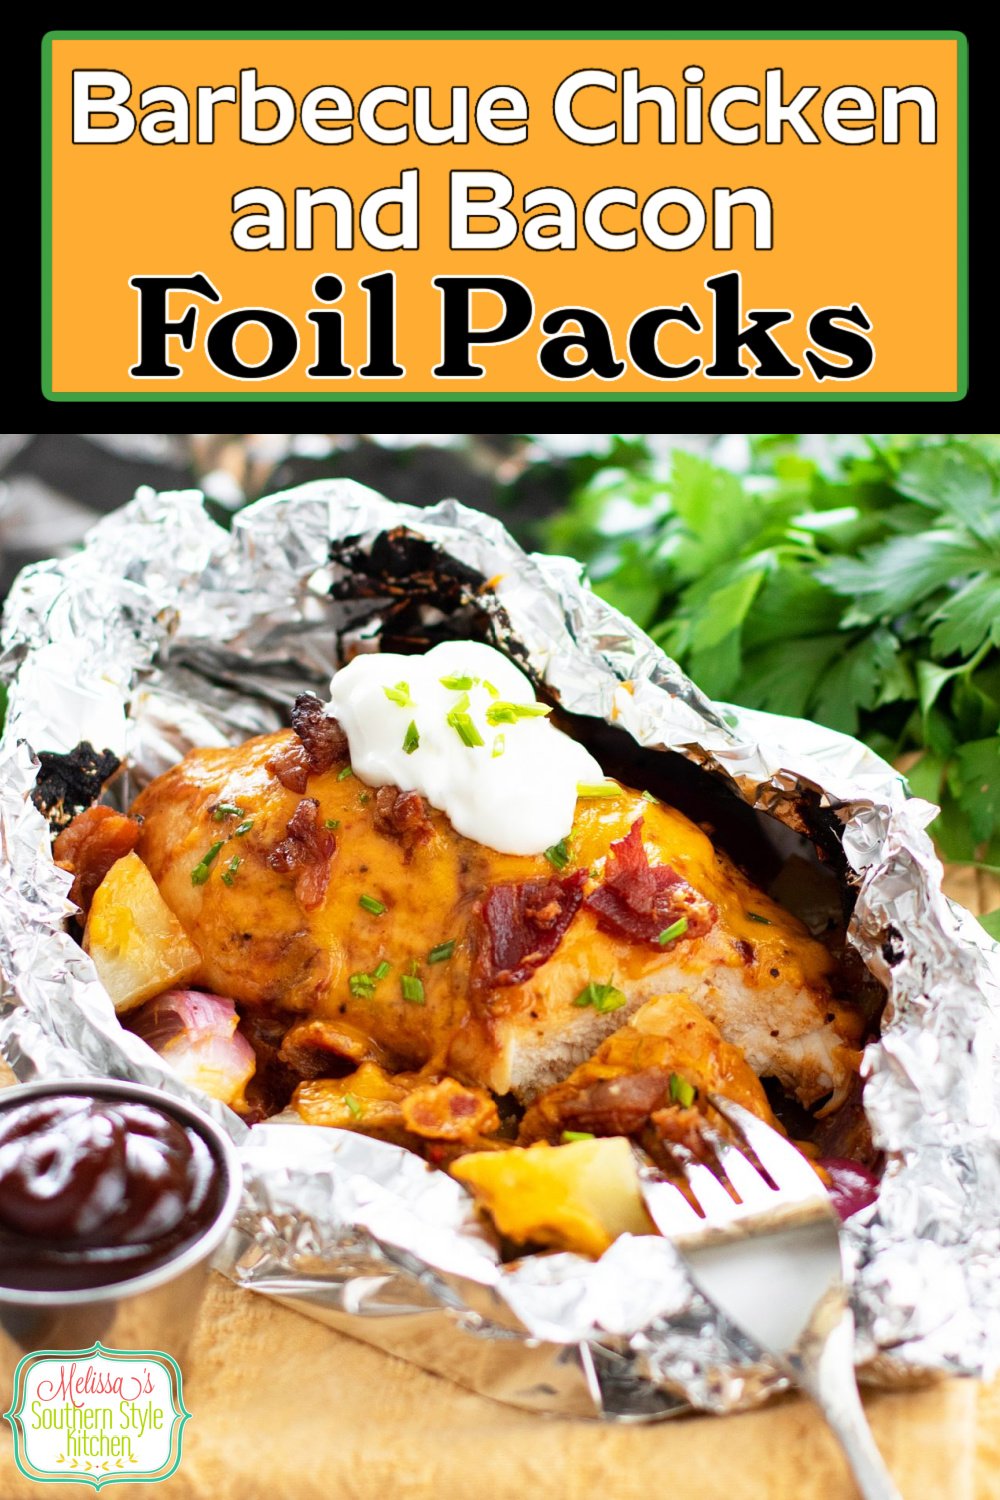 These oh so easy Barbecue Chicken and Potato Foil Packs can be made in the oven, on a grill or over a campfire #foilpacks #chickenfoilpacks #easychickenbreastrecipes #barbecuechicken #bbqchickenfoilpacks via @melissasssk